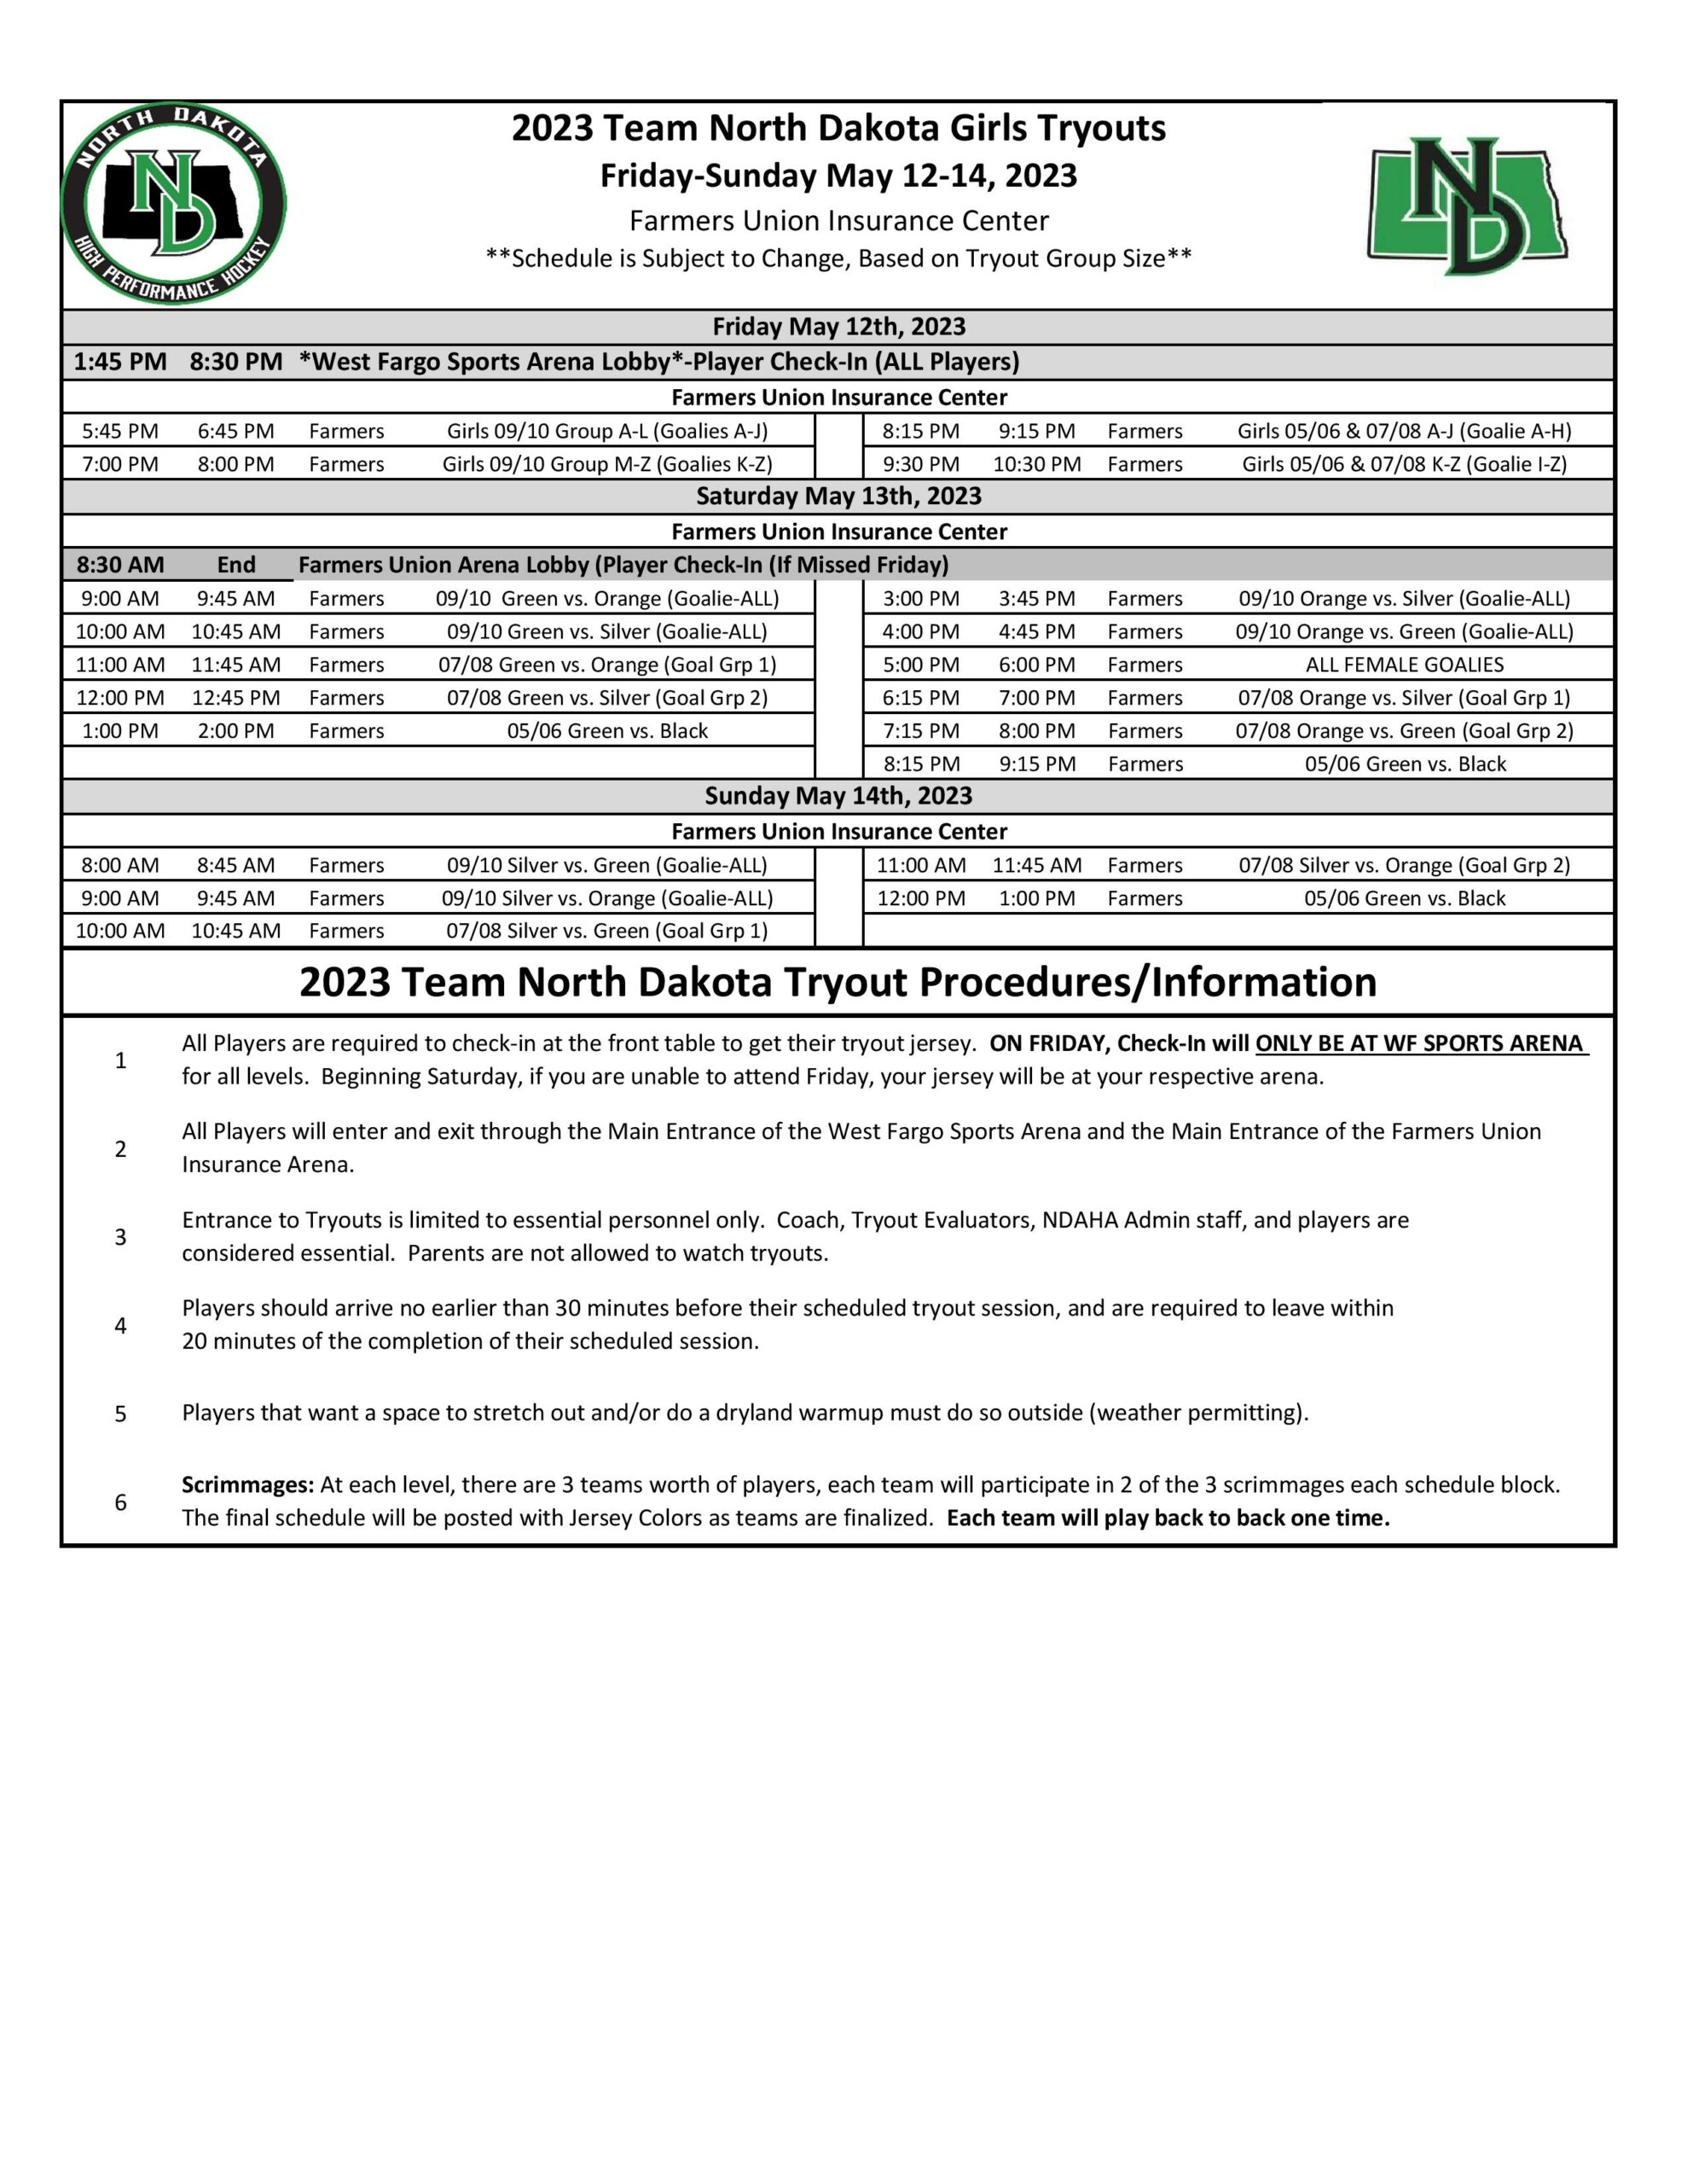 2023 TND Girls Tryouts FINAL-page-001